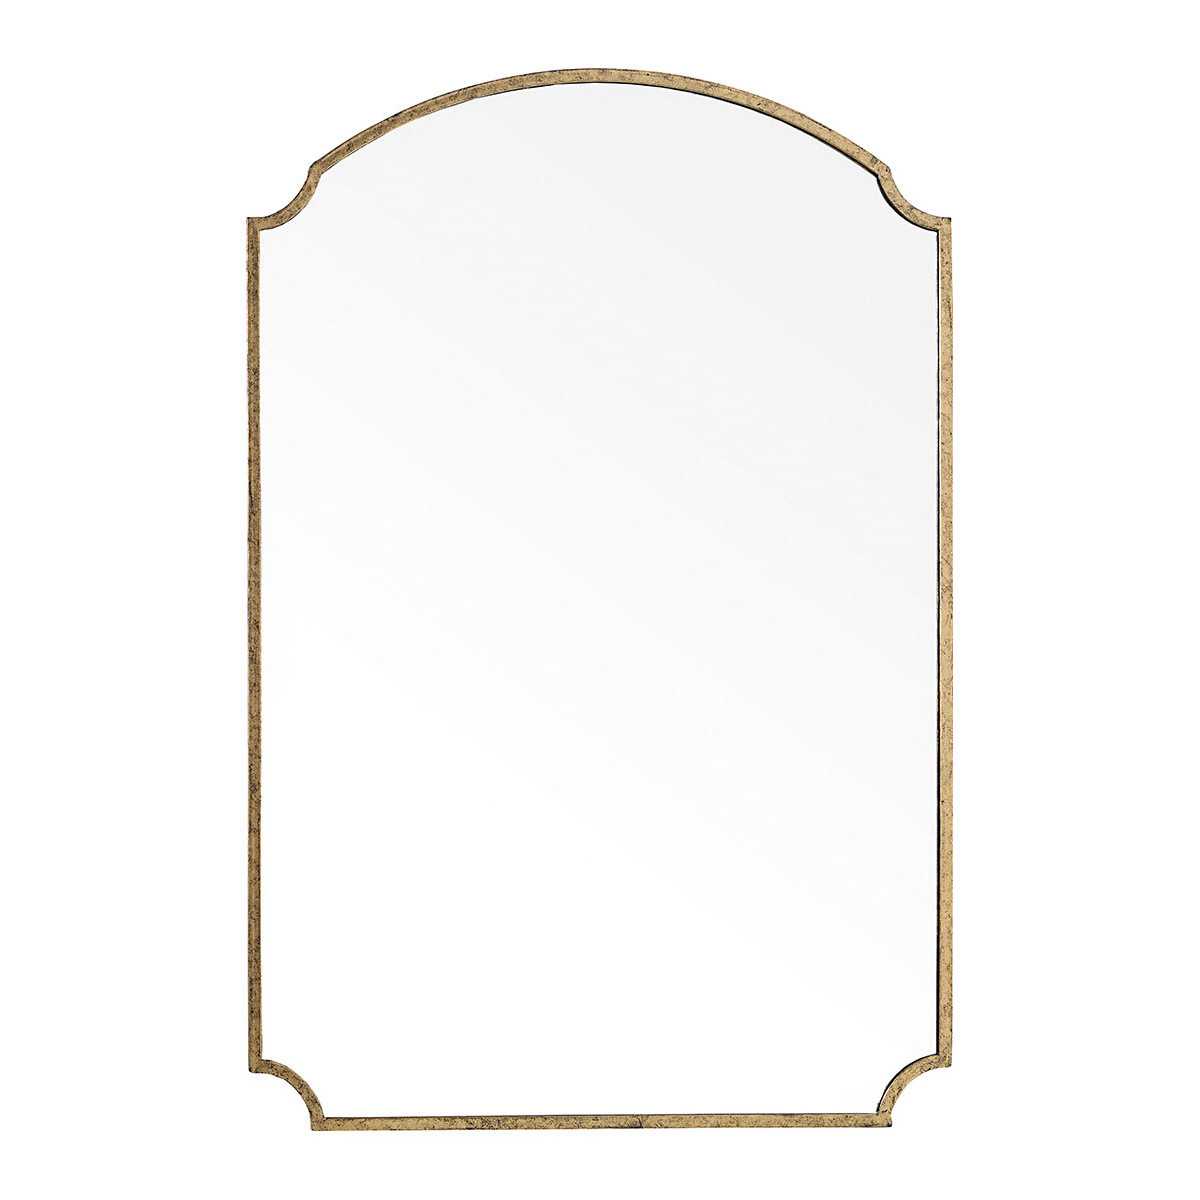 Mirror MARGAUX in aged gilded metal - H. 120 cm